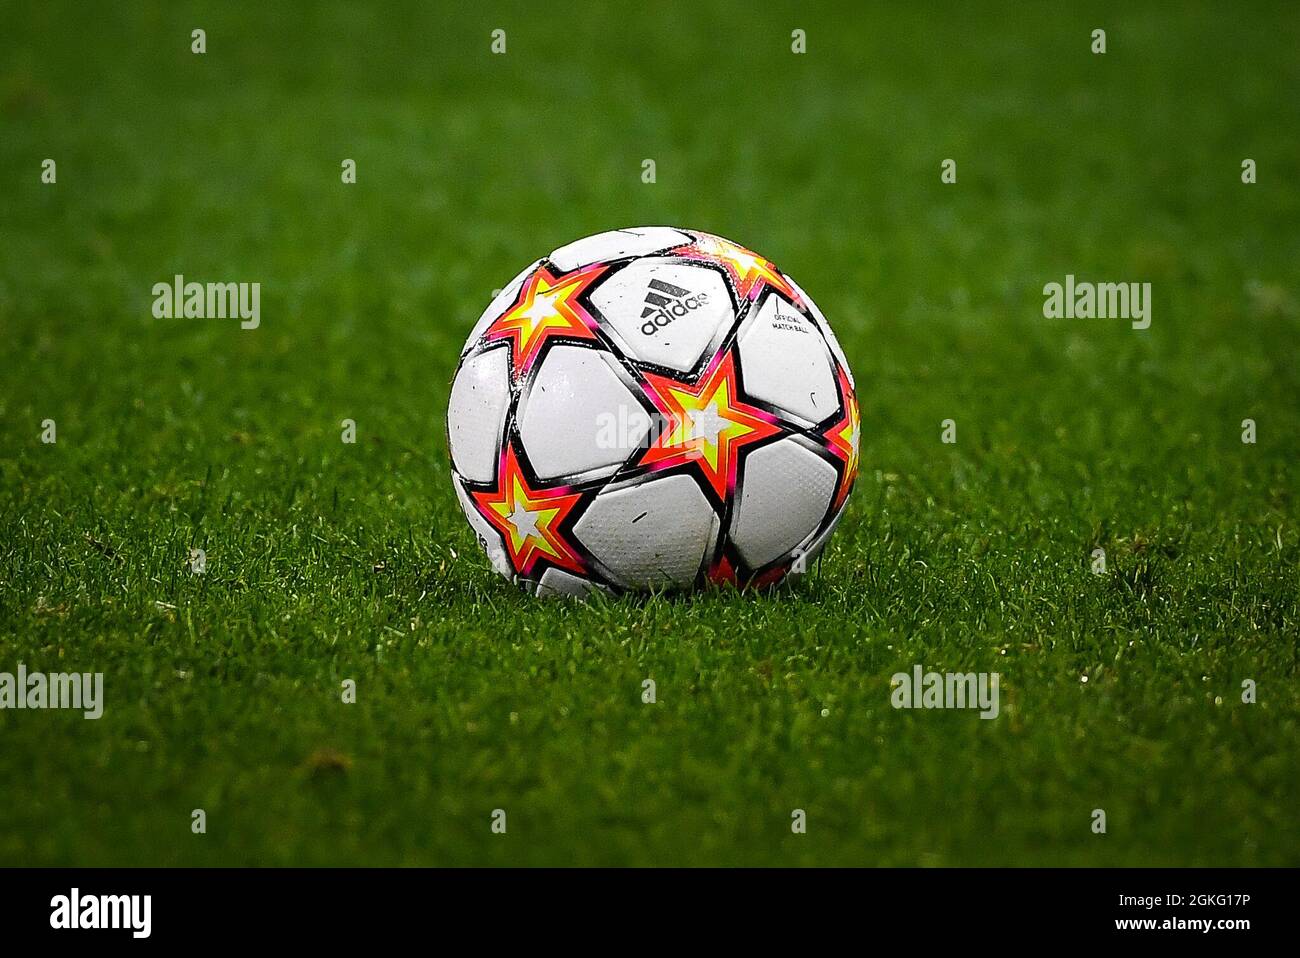 Lille, France, September 14, 2021, Illustration of the adidas match ball  during the UEFA Champions League, Group Stage, Group G football match  between Lille OSC (LOSC) and Verein fur Leibesubungen Wolfsburg on